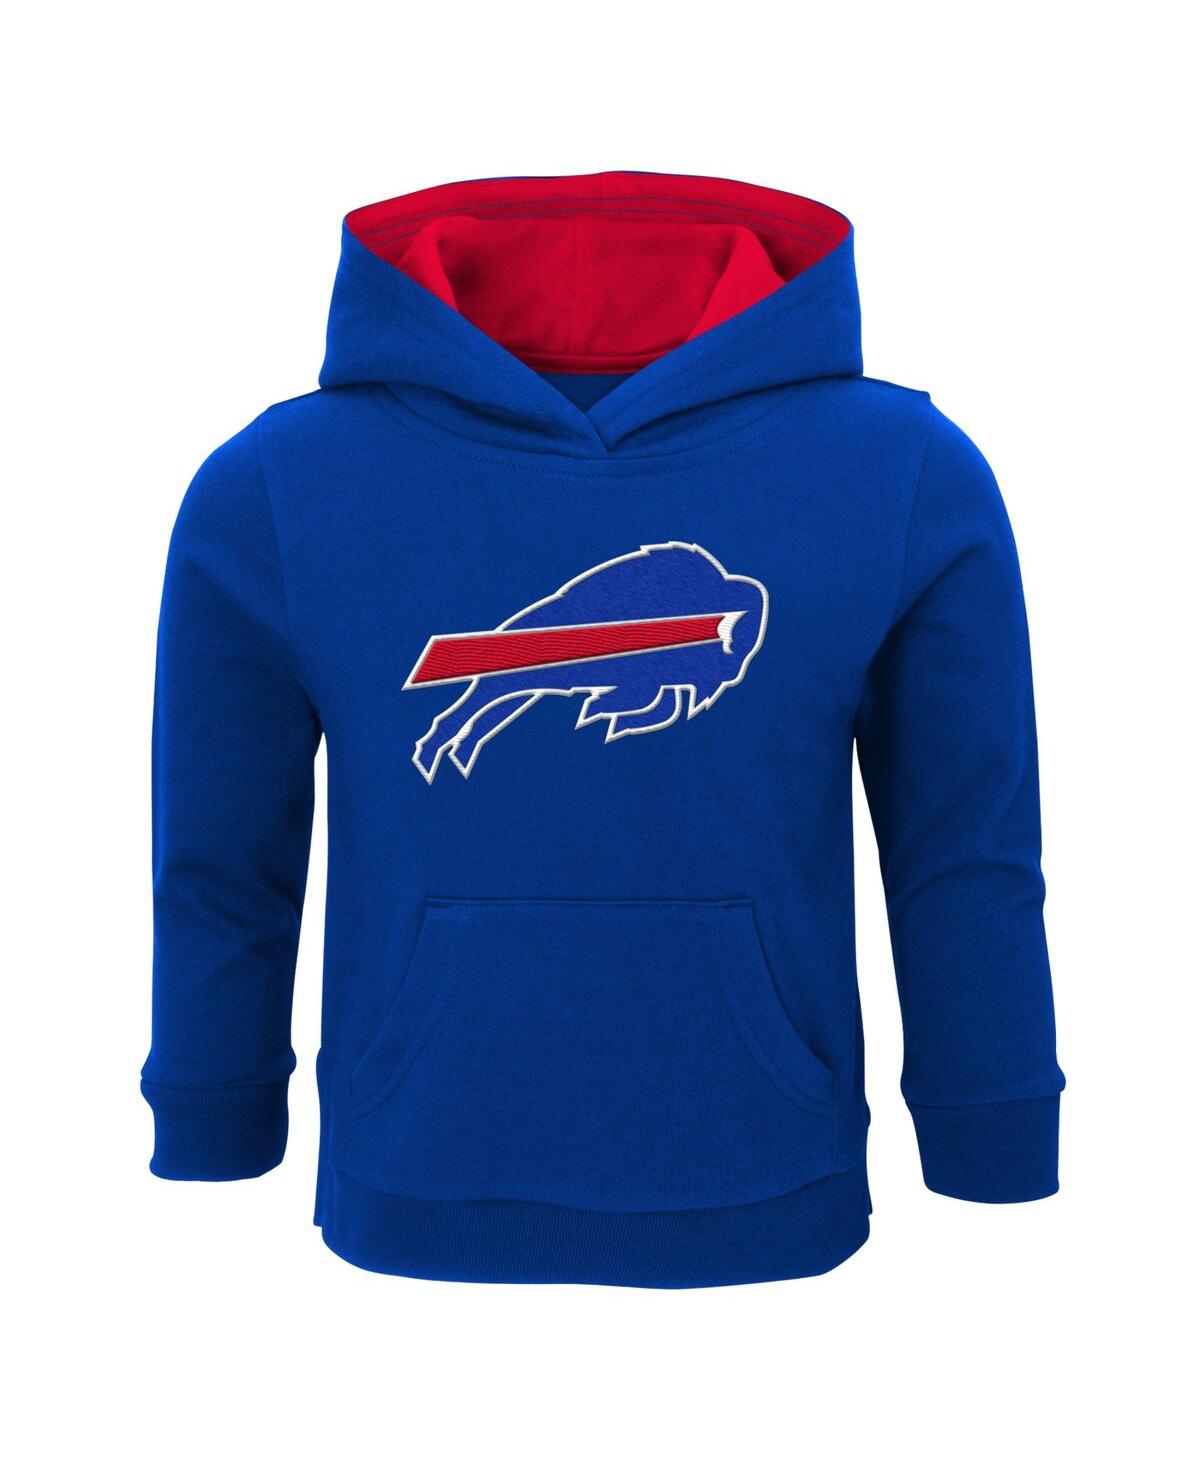 Outerstuff Babies' Toddler Boys And Girls Royal Buffalo Bills Prime Pullover Hoodie